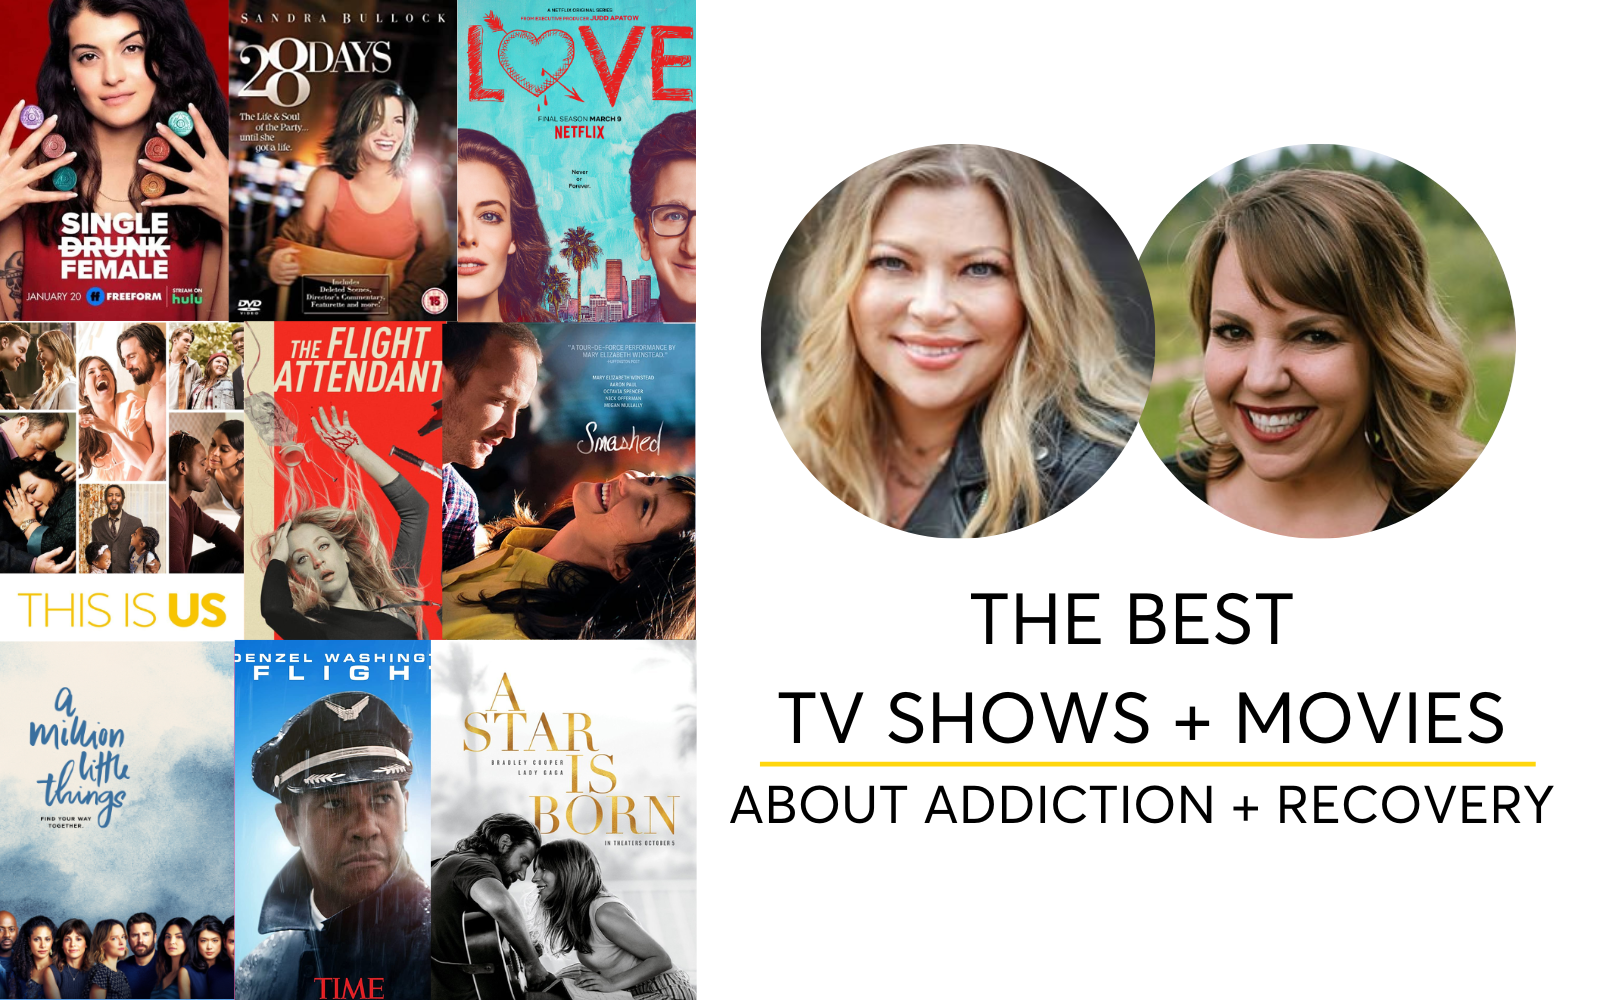 The Best TV Shows and Movies about Addiction and Recovery